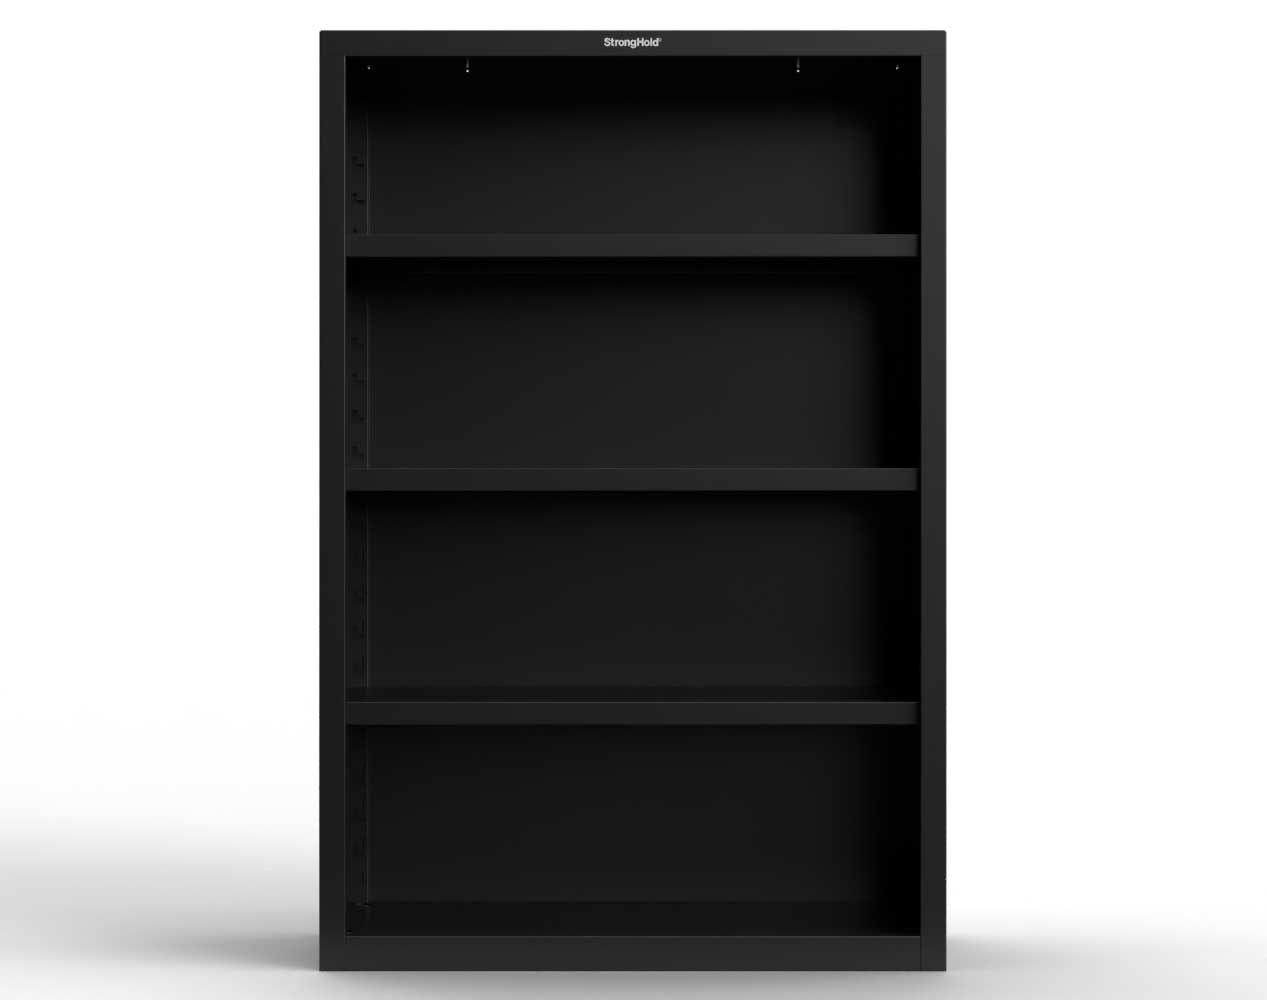 Heavy Duty 18 GA Closed Shelving Unit with 3 Shelves - 48 in. W x 24 in. D x 72 in. H